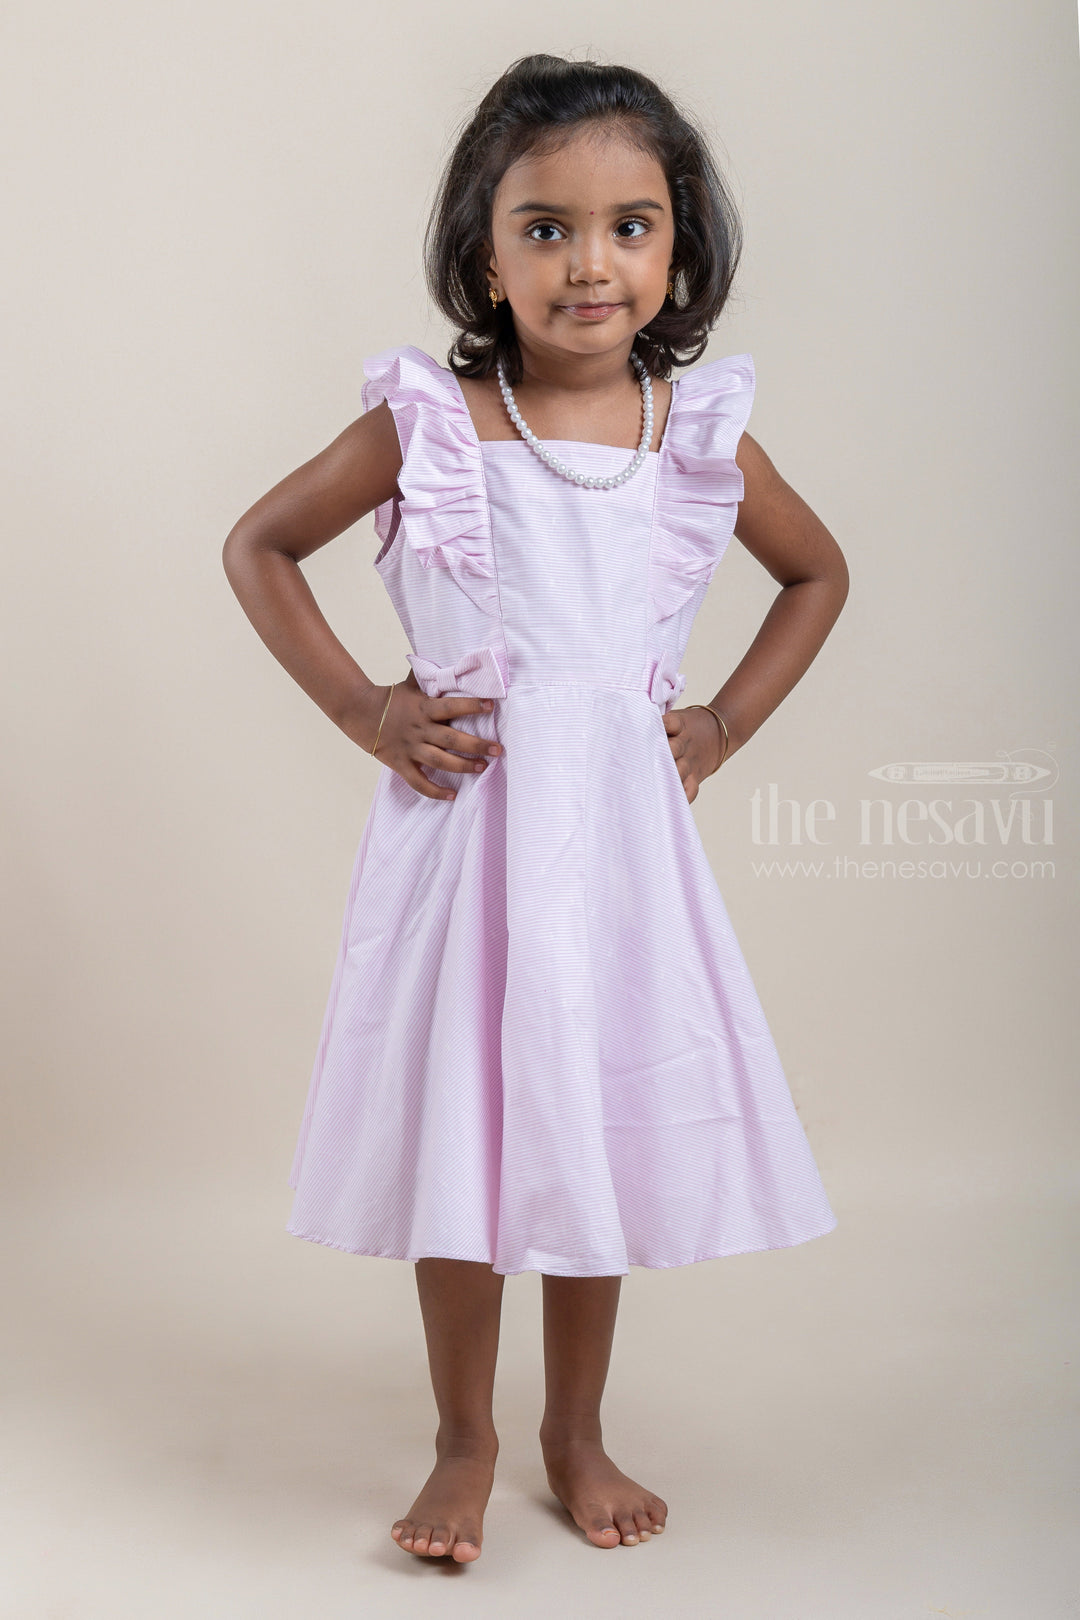 The Nesavu Frocks & Dresses Casual Cotton Frock with Pink Pin Striped Design and Ruffled Yoke For Girls psr silks Nesavu 16 (1Y) / Pink / Cotton GFC1092A